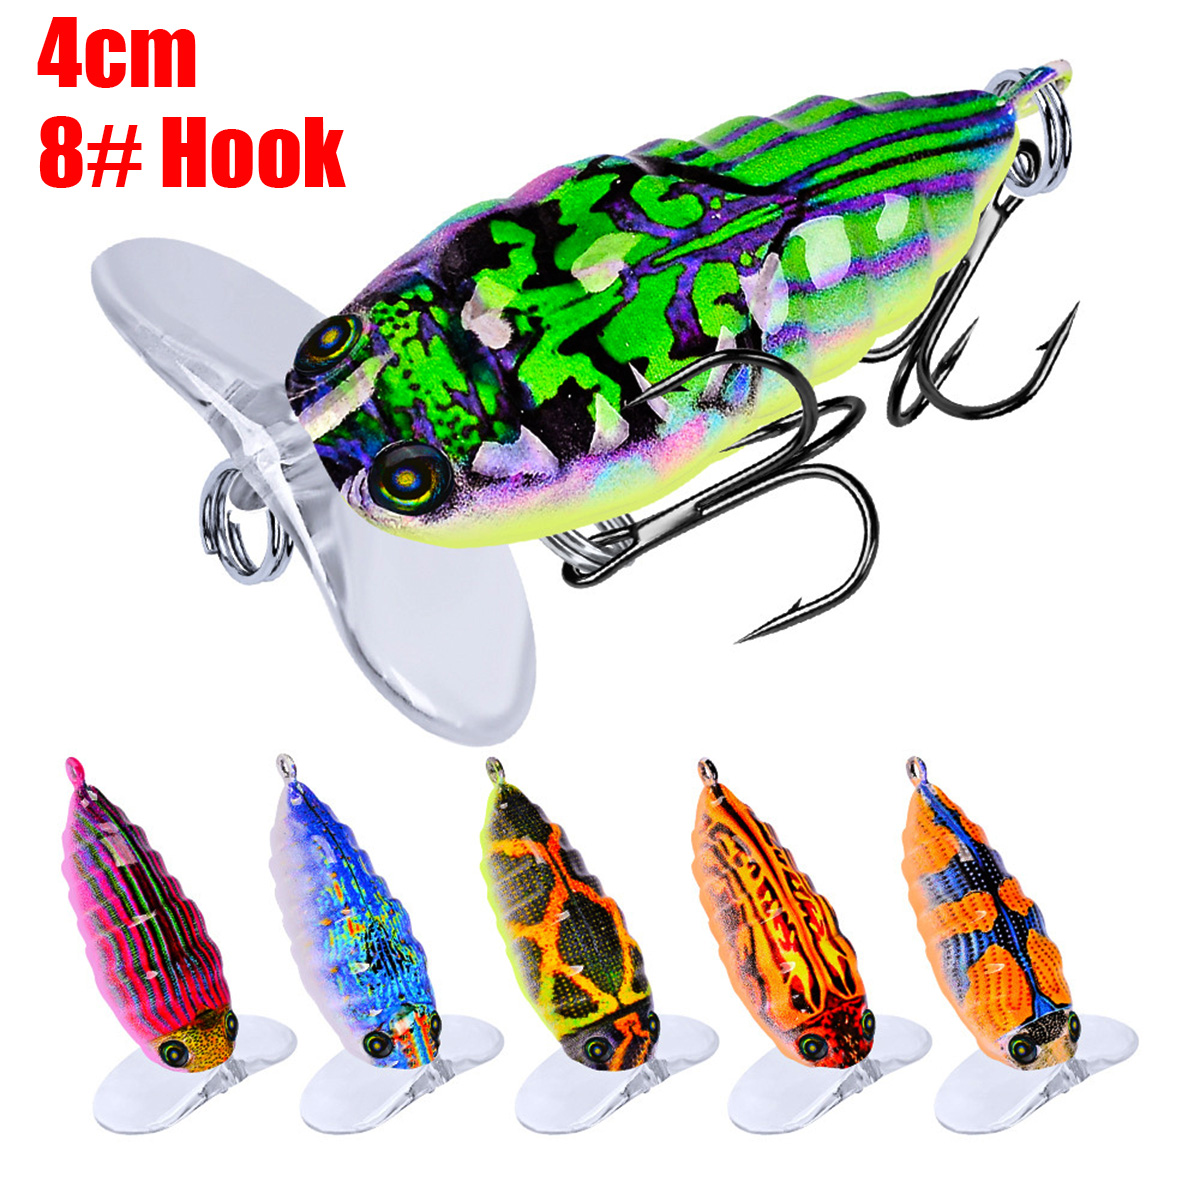 ZANLURE-1Pcs-4cm4g-Popper-Artificial-Insect-Sytle-Topwater-Fishing-Lure-8-Treble-Hook-1611036-1